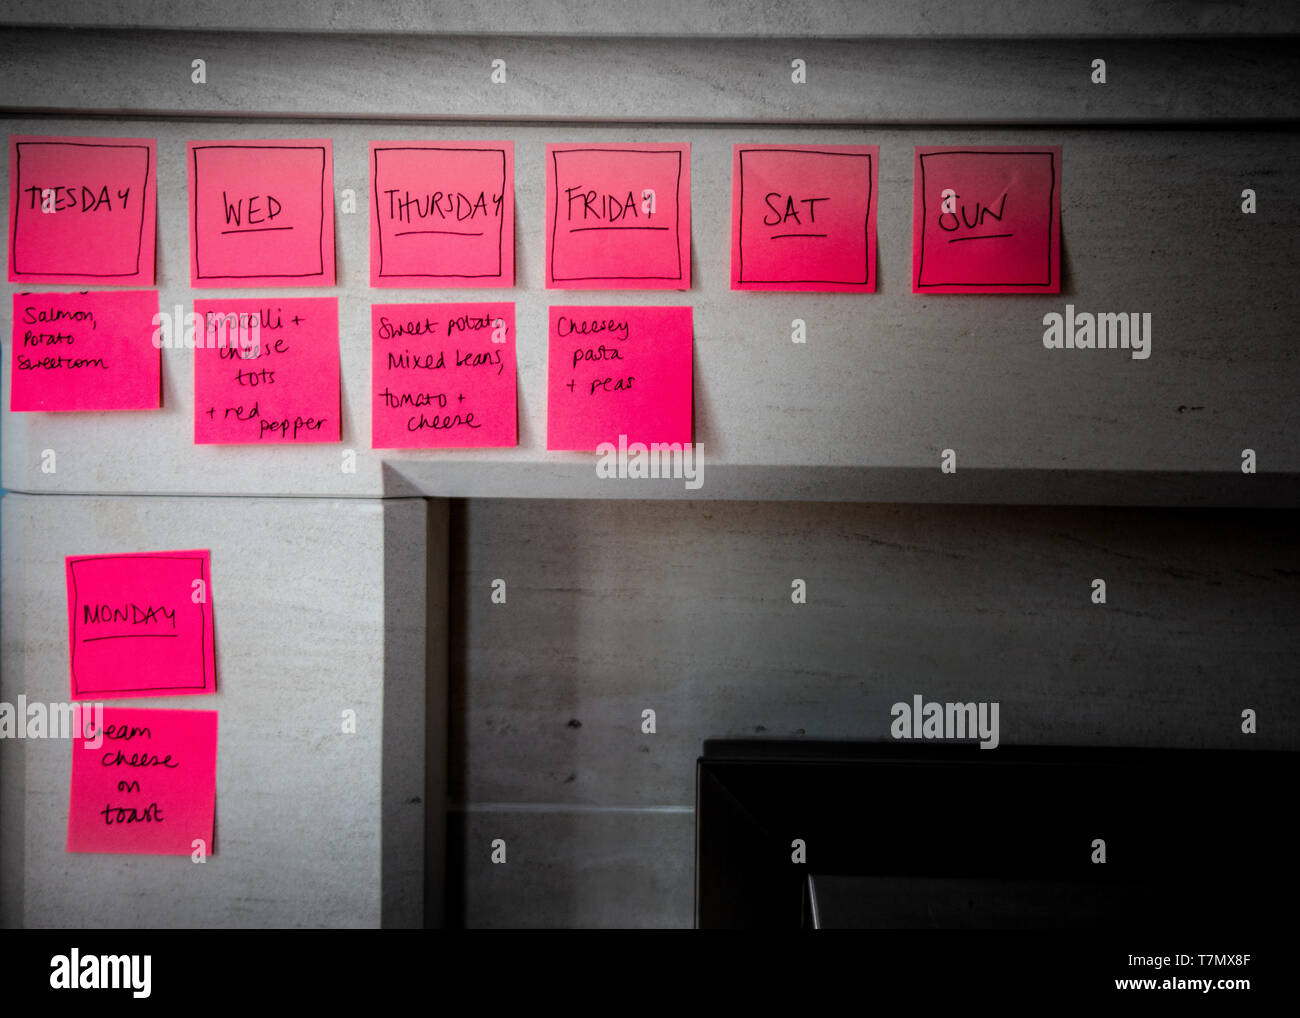 A bright abstract image of a meal list and days of the week on pink sticky notes Stock Photo